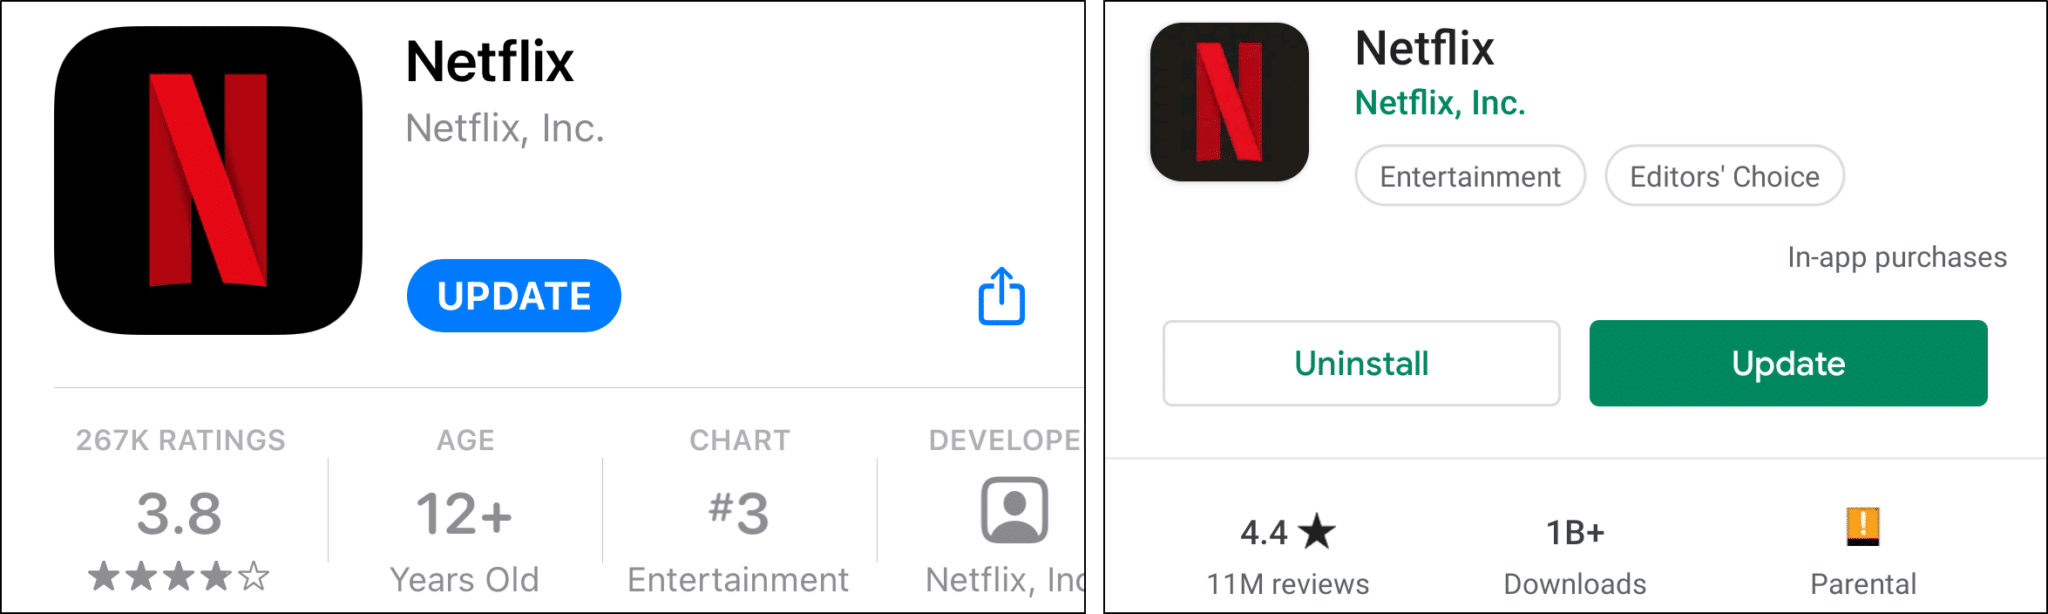 Update the Netflix app on iOS to fix Netflix keeps buffering, freezing, stuck loading or not playing